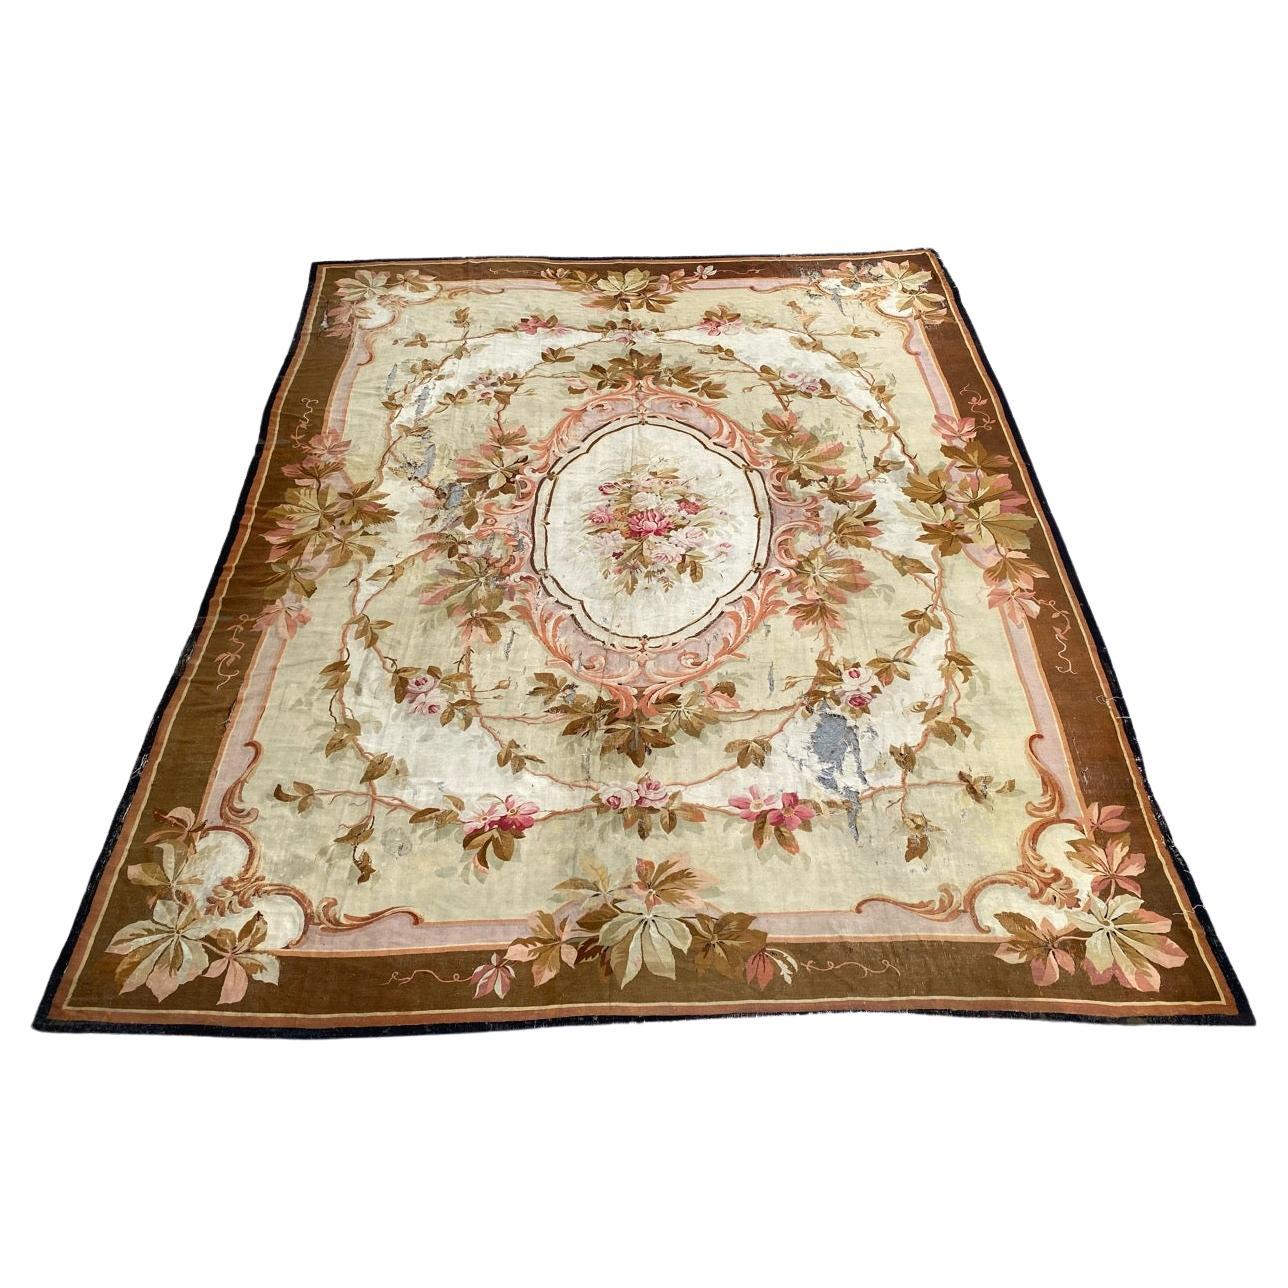 Bobyrug’s Nice Distressed Large Antique Aubusson Flat Rug